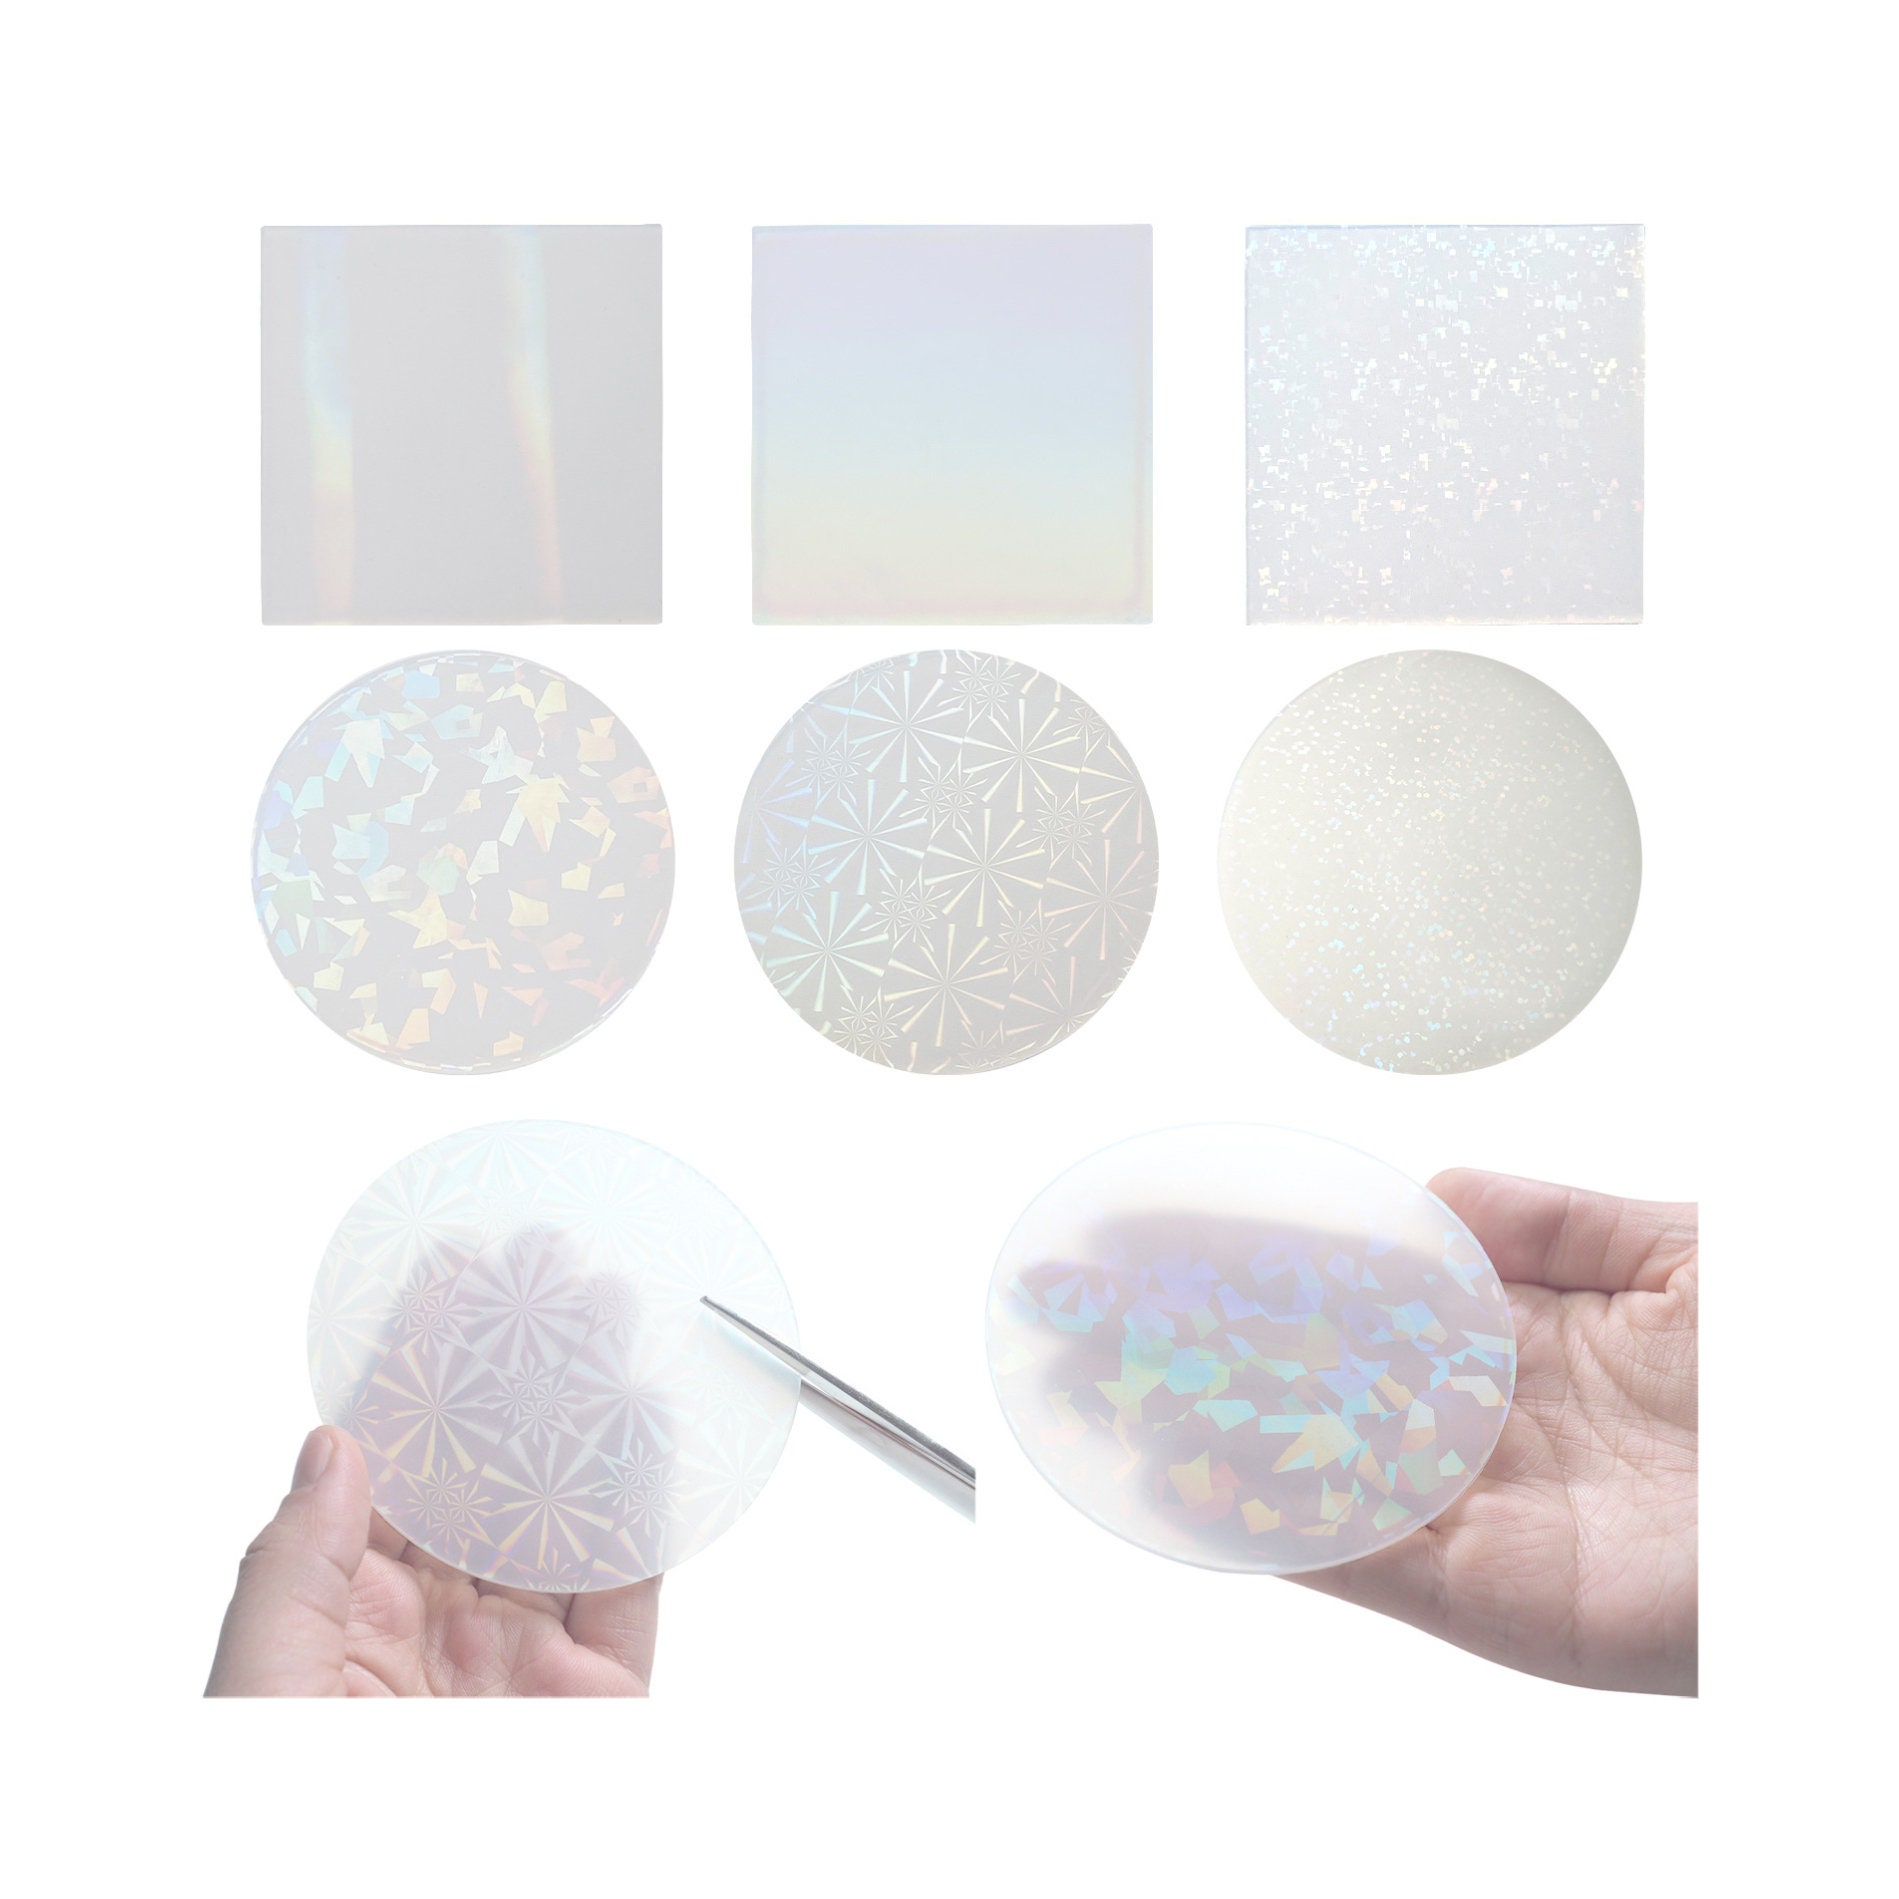 Cracked Glass Holographic Vinyl Sticker Laminate Self Adhesive Overlay  Resin Transparency Holographic Sticker Paper, Sticker Overlay 